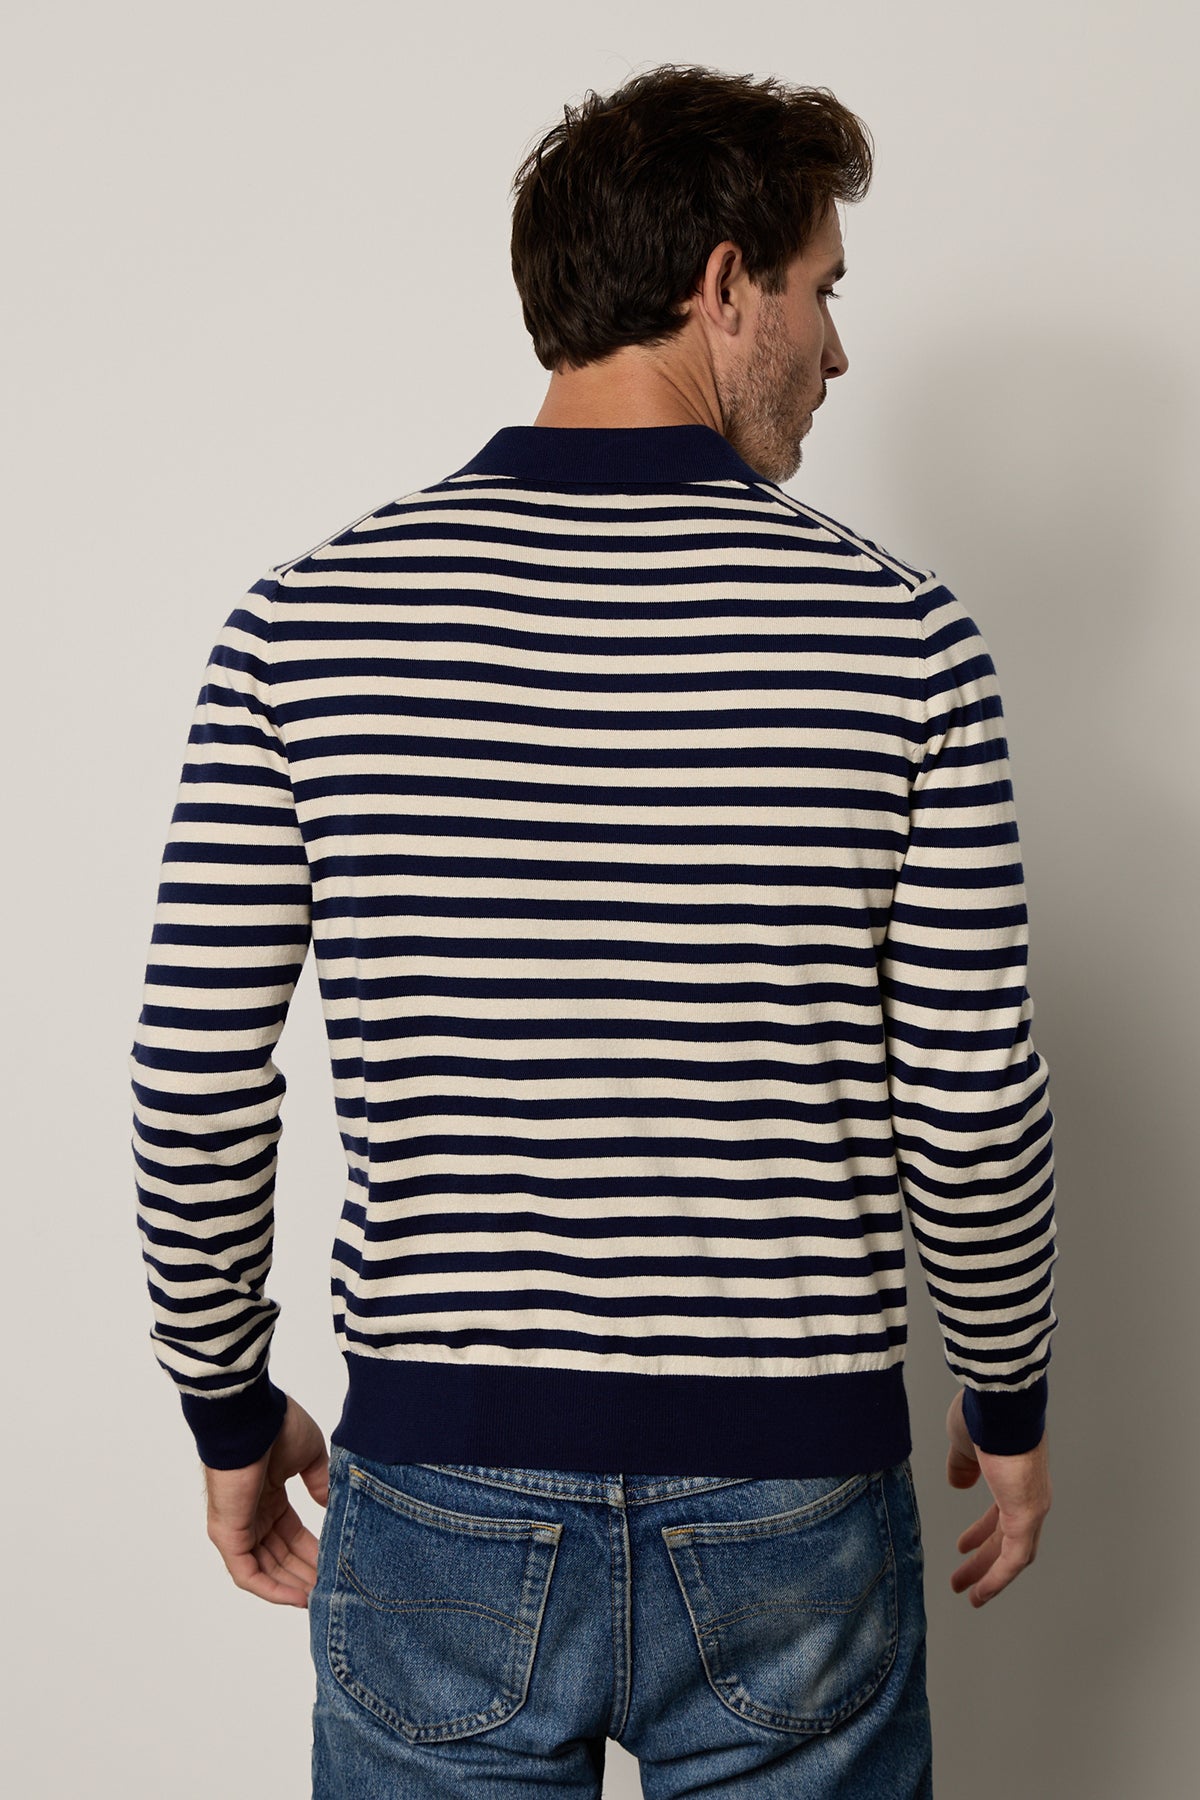 The back view of a man wearing a Velvet by Graham & Spencer RICKY STRIPED POLO sweater.-25943739924673